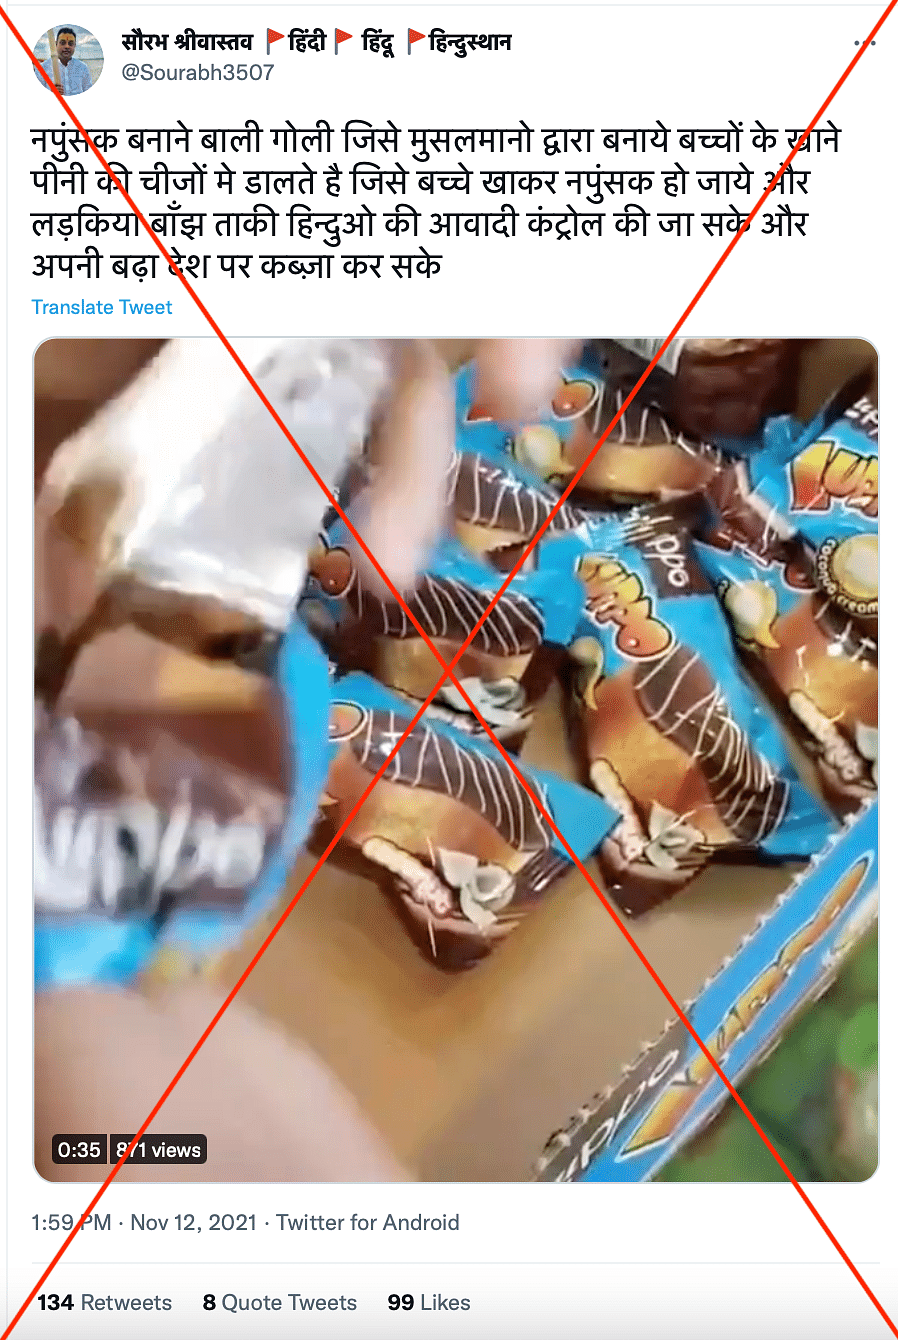 Luppo Cakes shown in the video do not cause paralysis. Also, they are not  sold in India - FACTLY